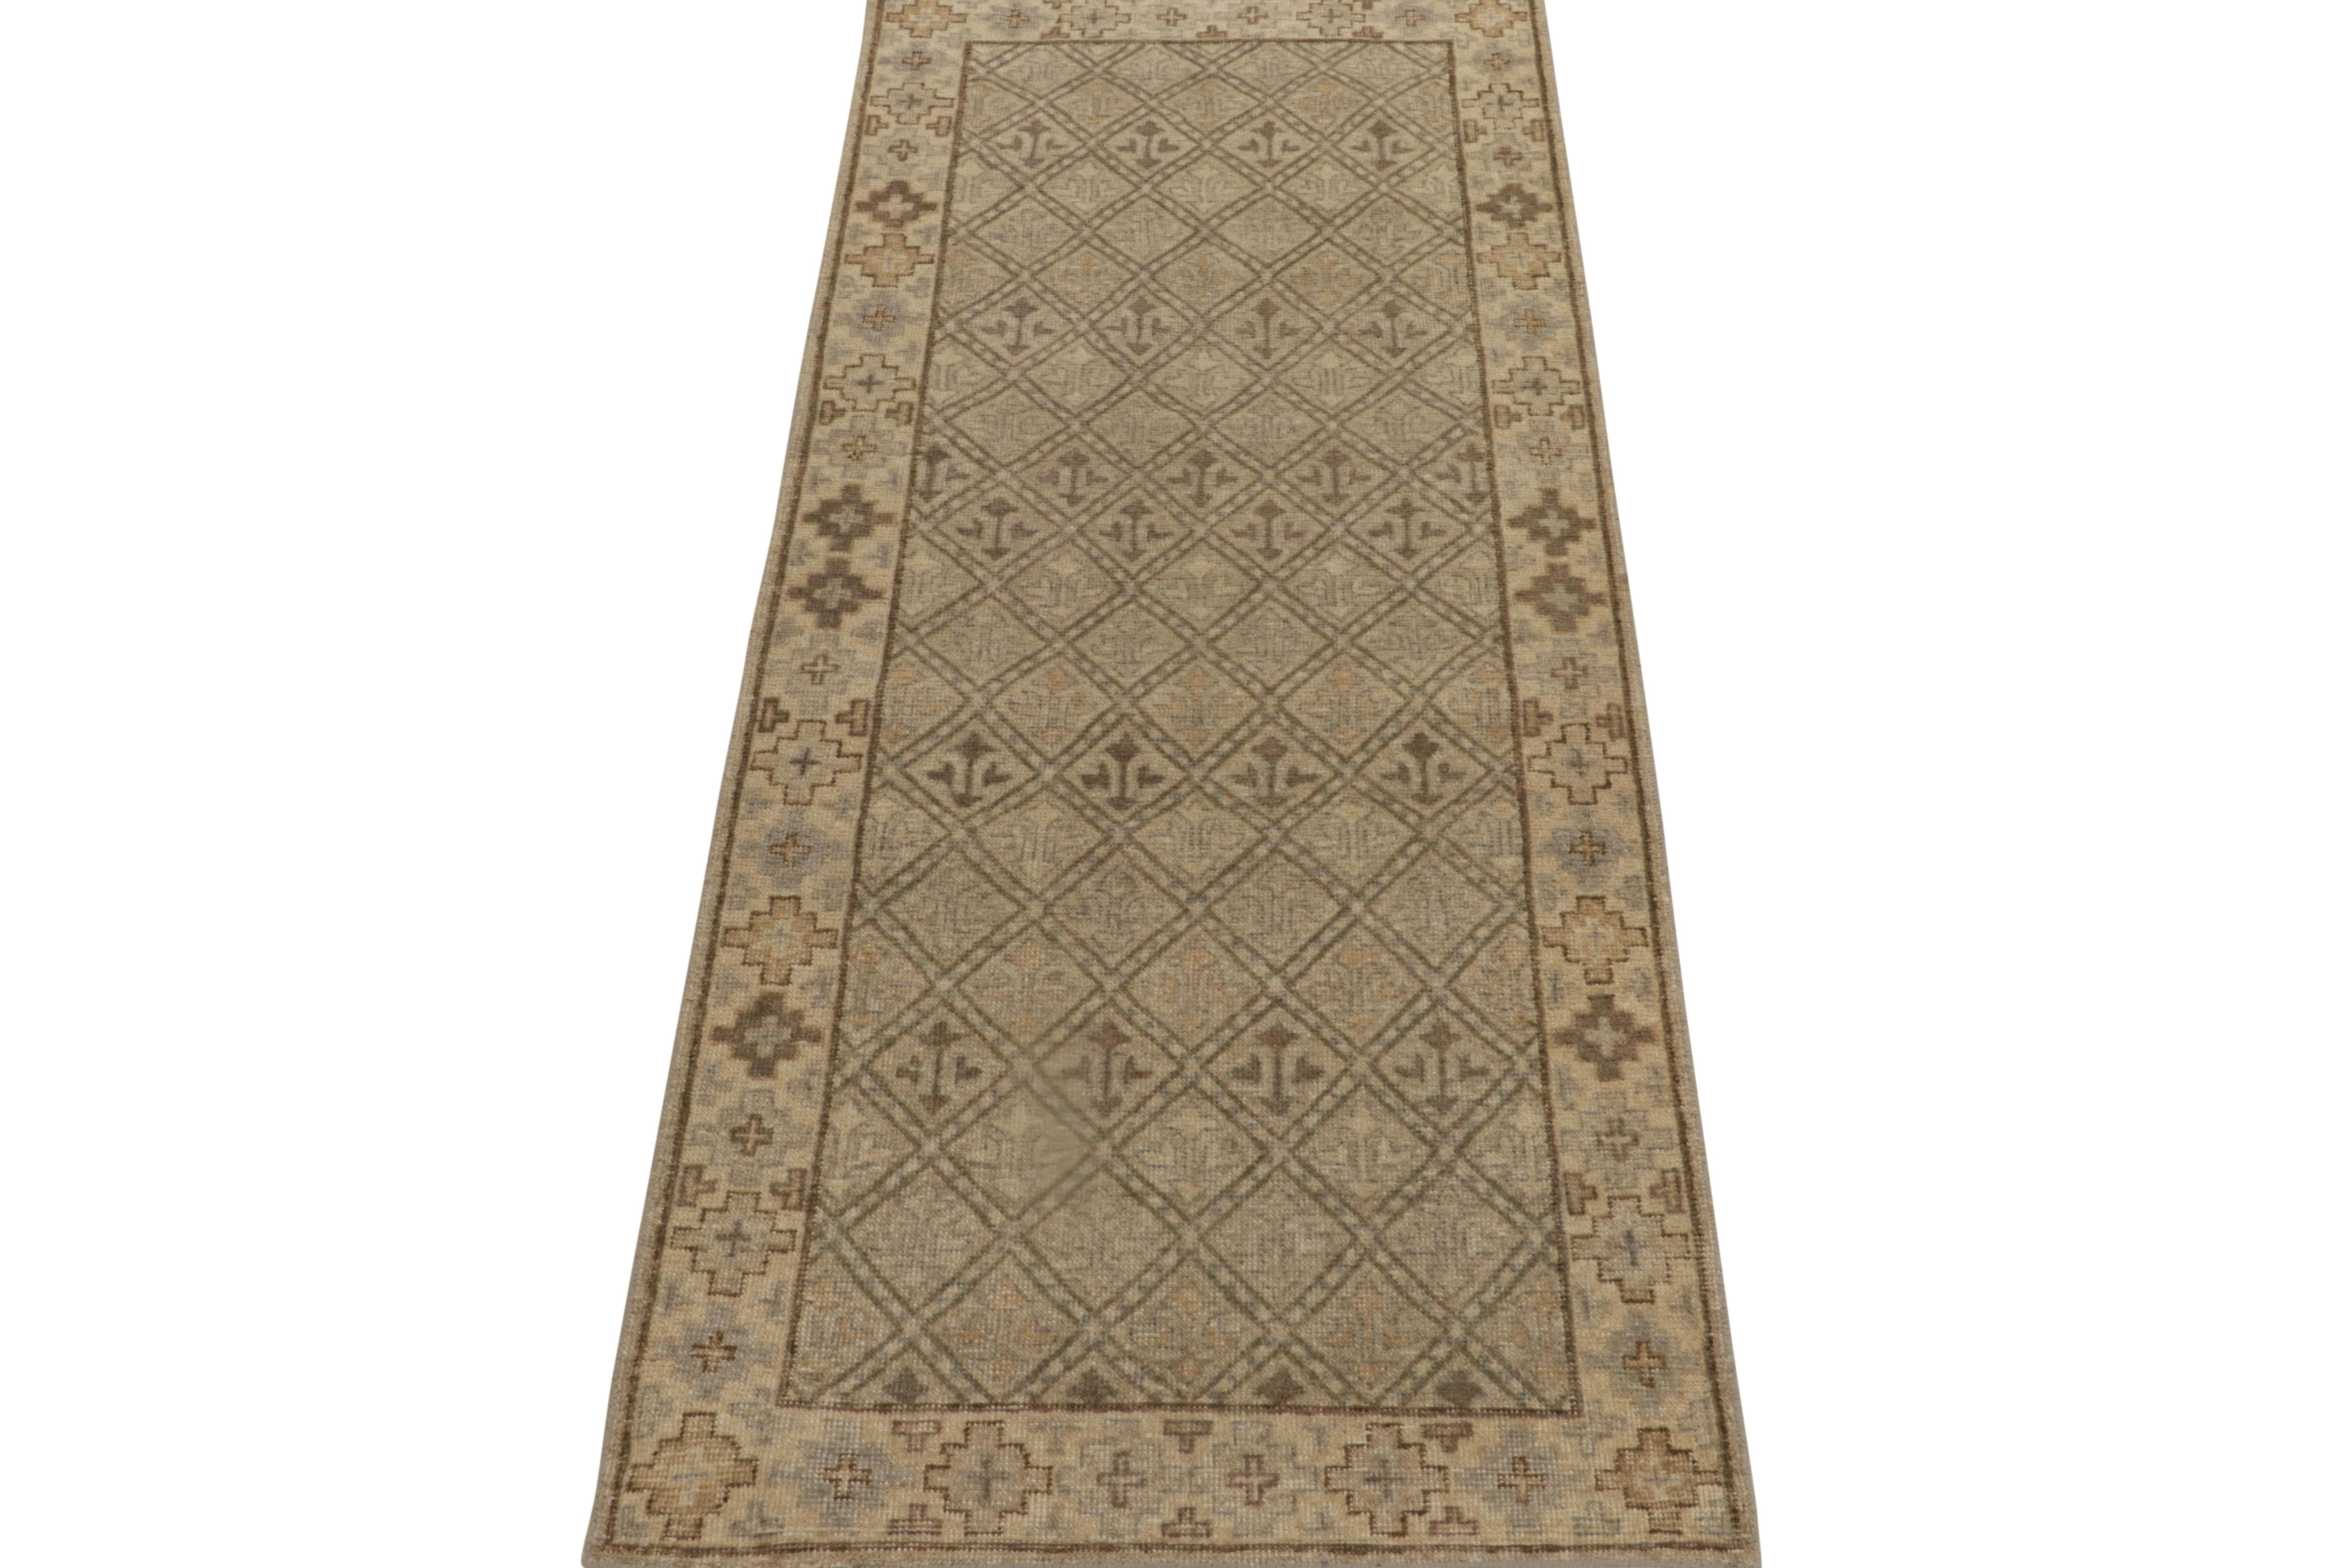 Indian Rug & Kilim’s Distressed Style Runner in Beige-Brown & Gray Tribal Patterns For Sale